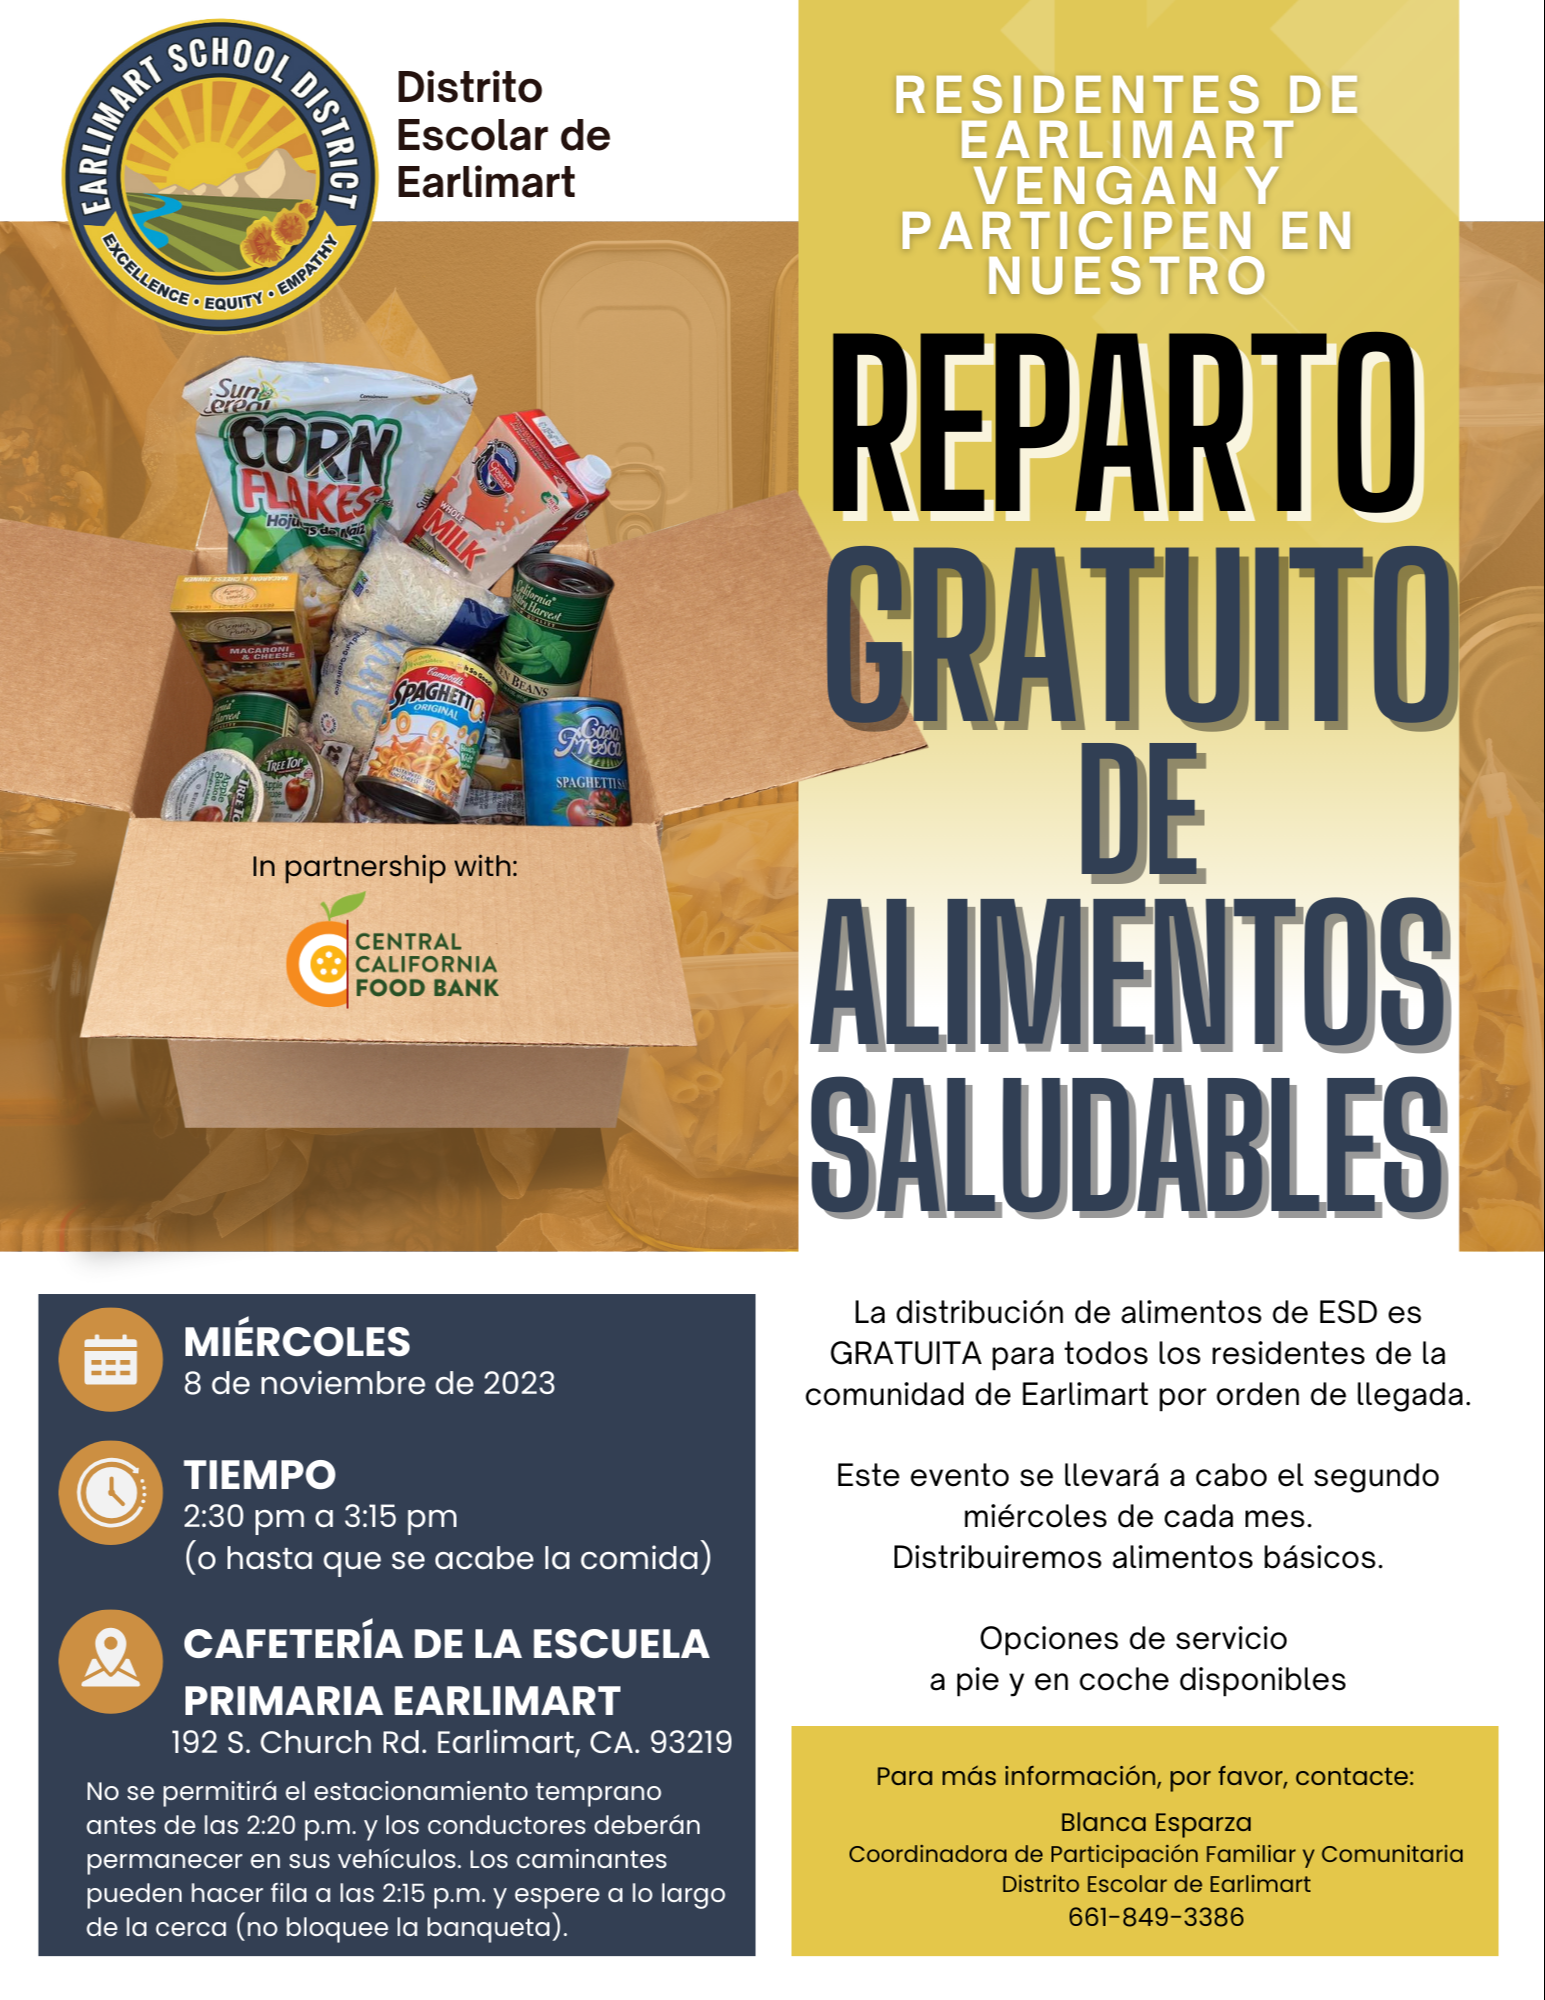 ESD logo, Box with food staples, information on free food distribution (all information in article) Spanish version